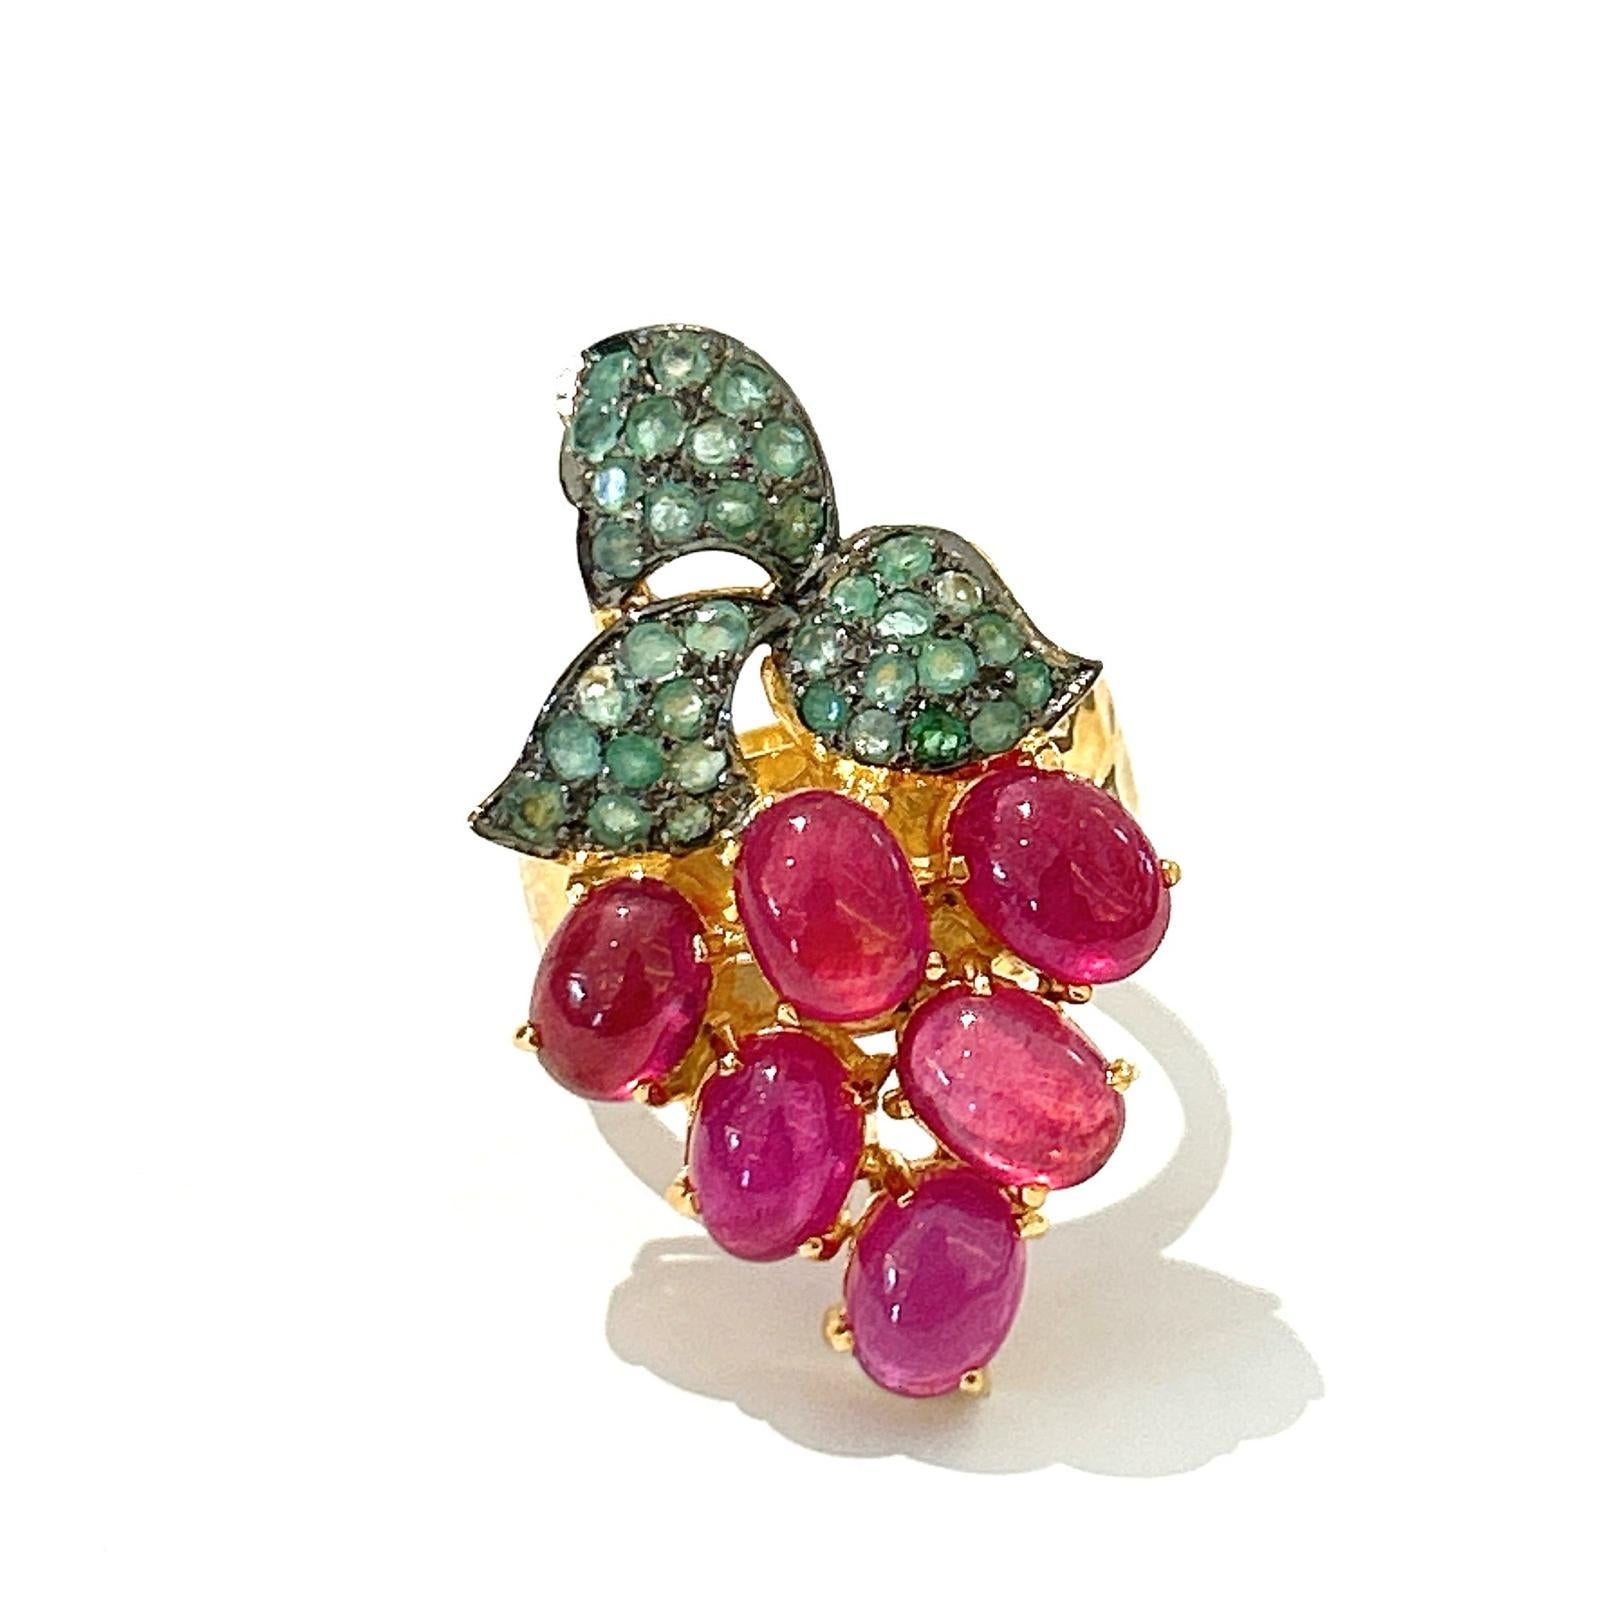 Bochic “Orient” Pearl & Multi Sapphire Vintage Cluster Ring Set 18K & Silver 

Red natural ruby, cabochon shape - 6 carats 
Yellow natural sapphire 
Orange natural sapphire 
Green natural Emerald - 1 carat 

This Ring is from the 